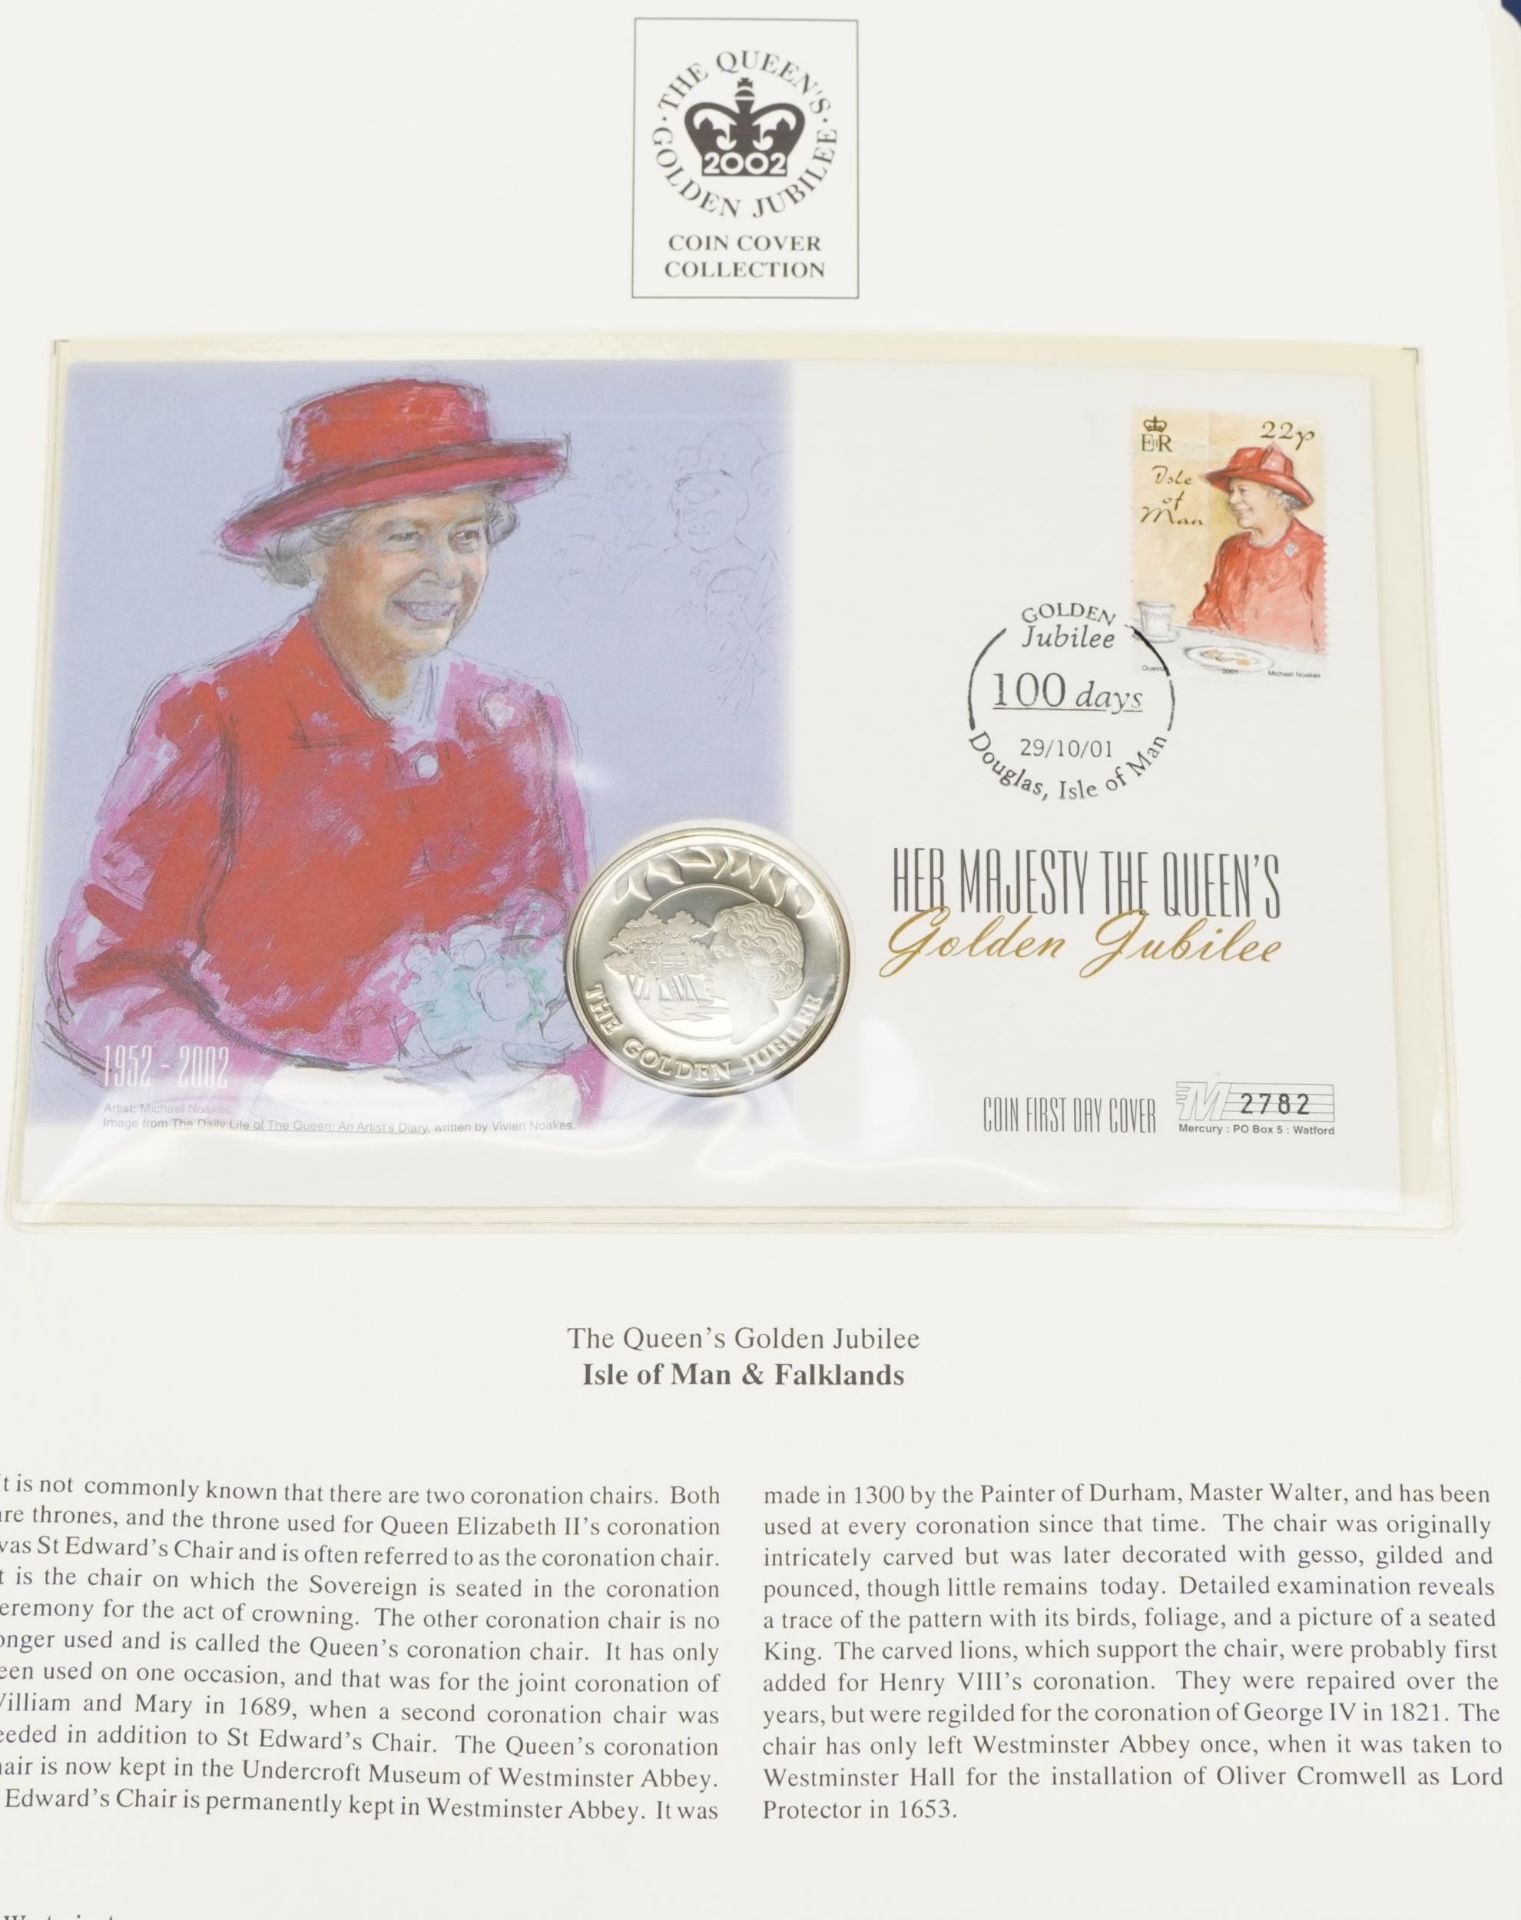 The Queen's Golden Jubilee coin covers arranged in two albums including Isle of Man & Falklands - Image 2 of 11